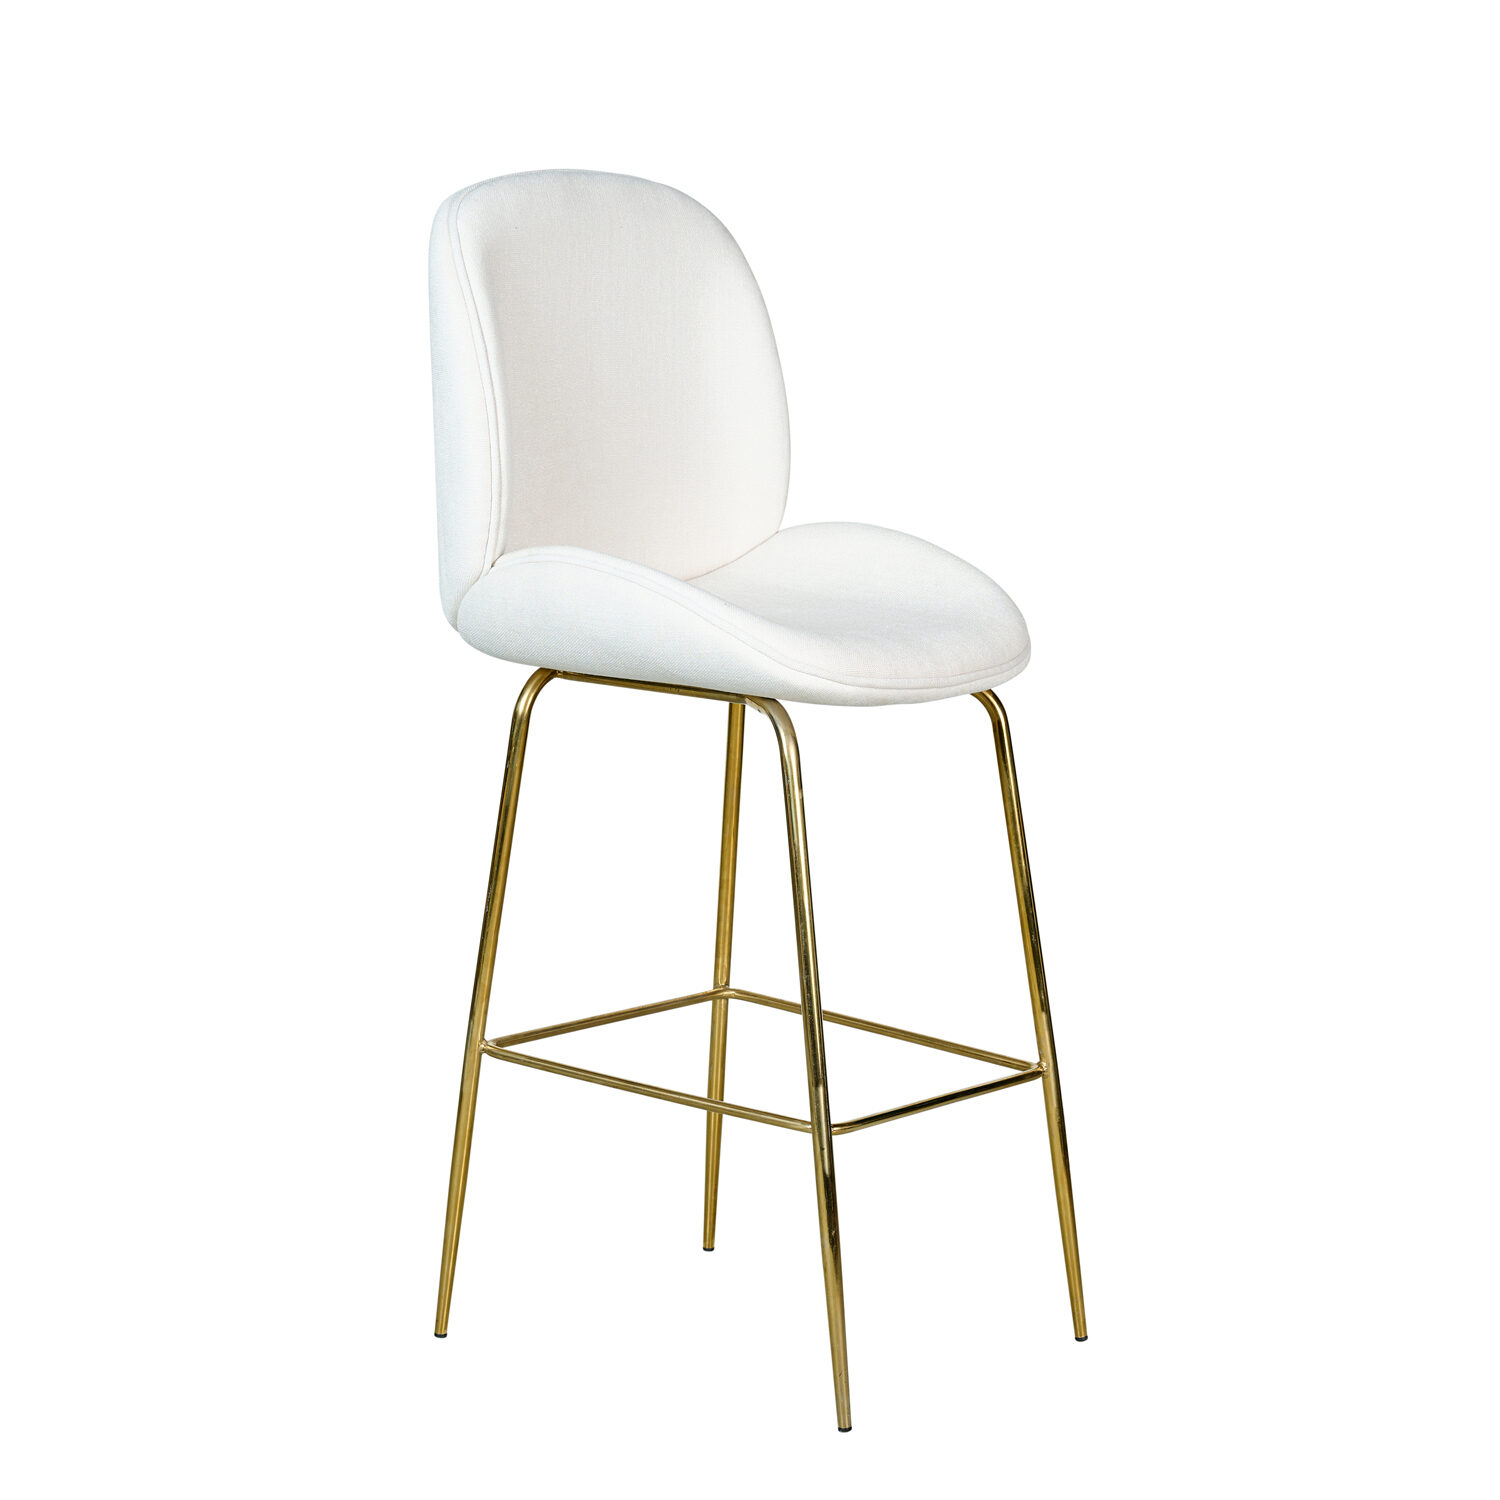 Harlow Stool - White Fabric / Gold Legs - Event Artillery